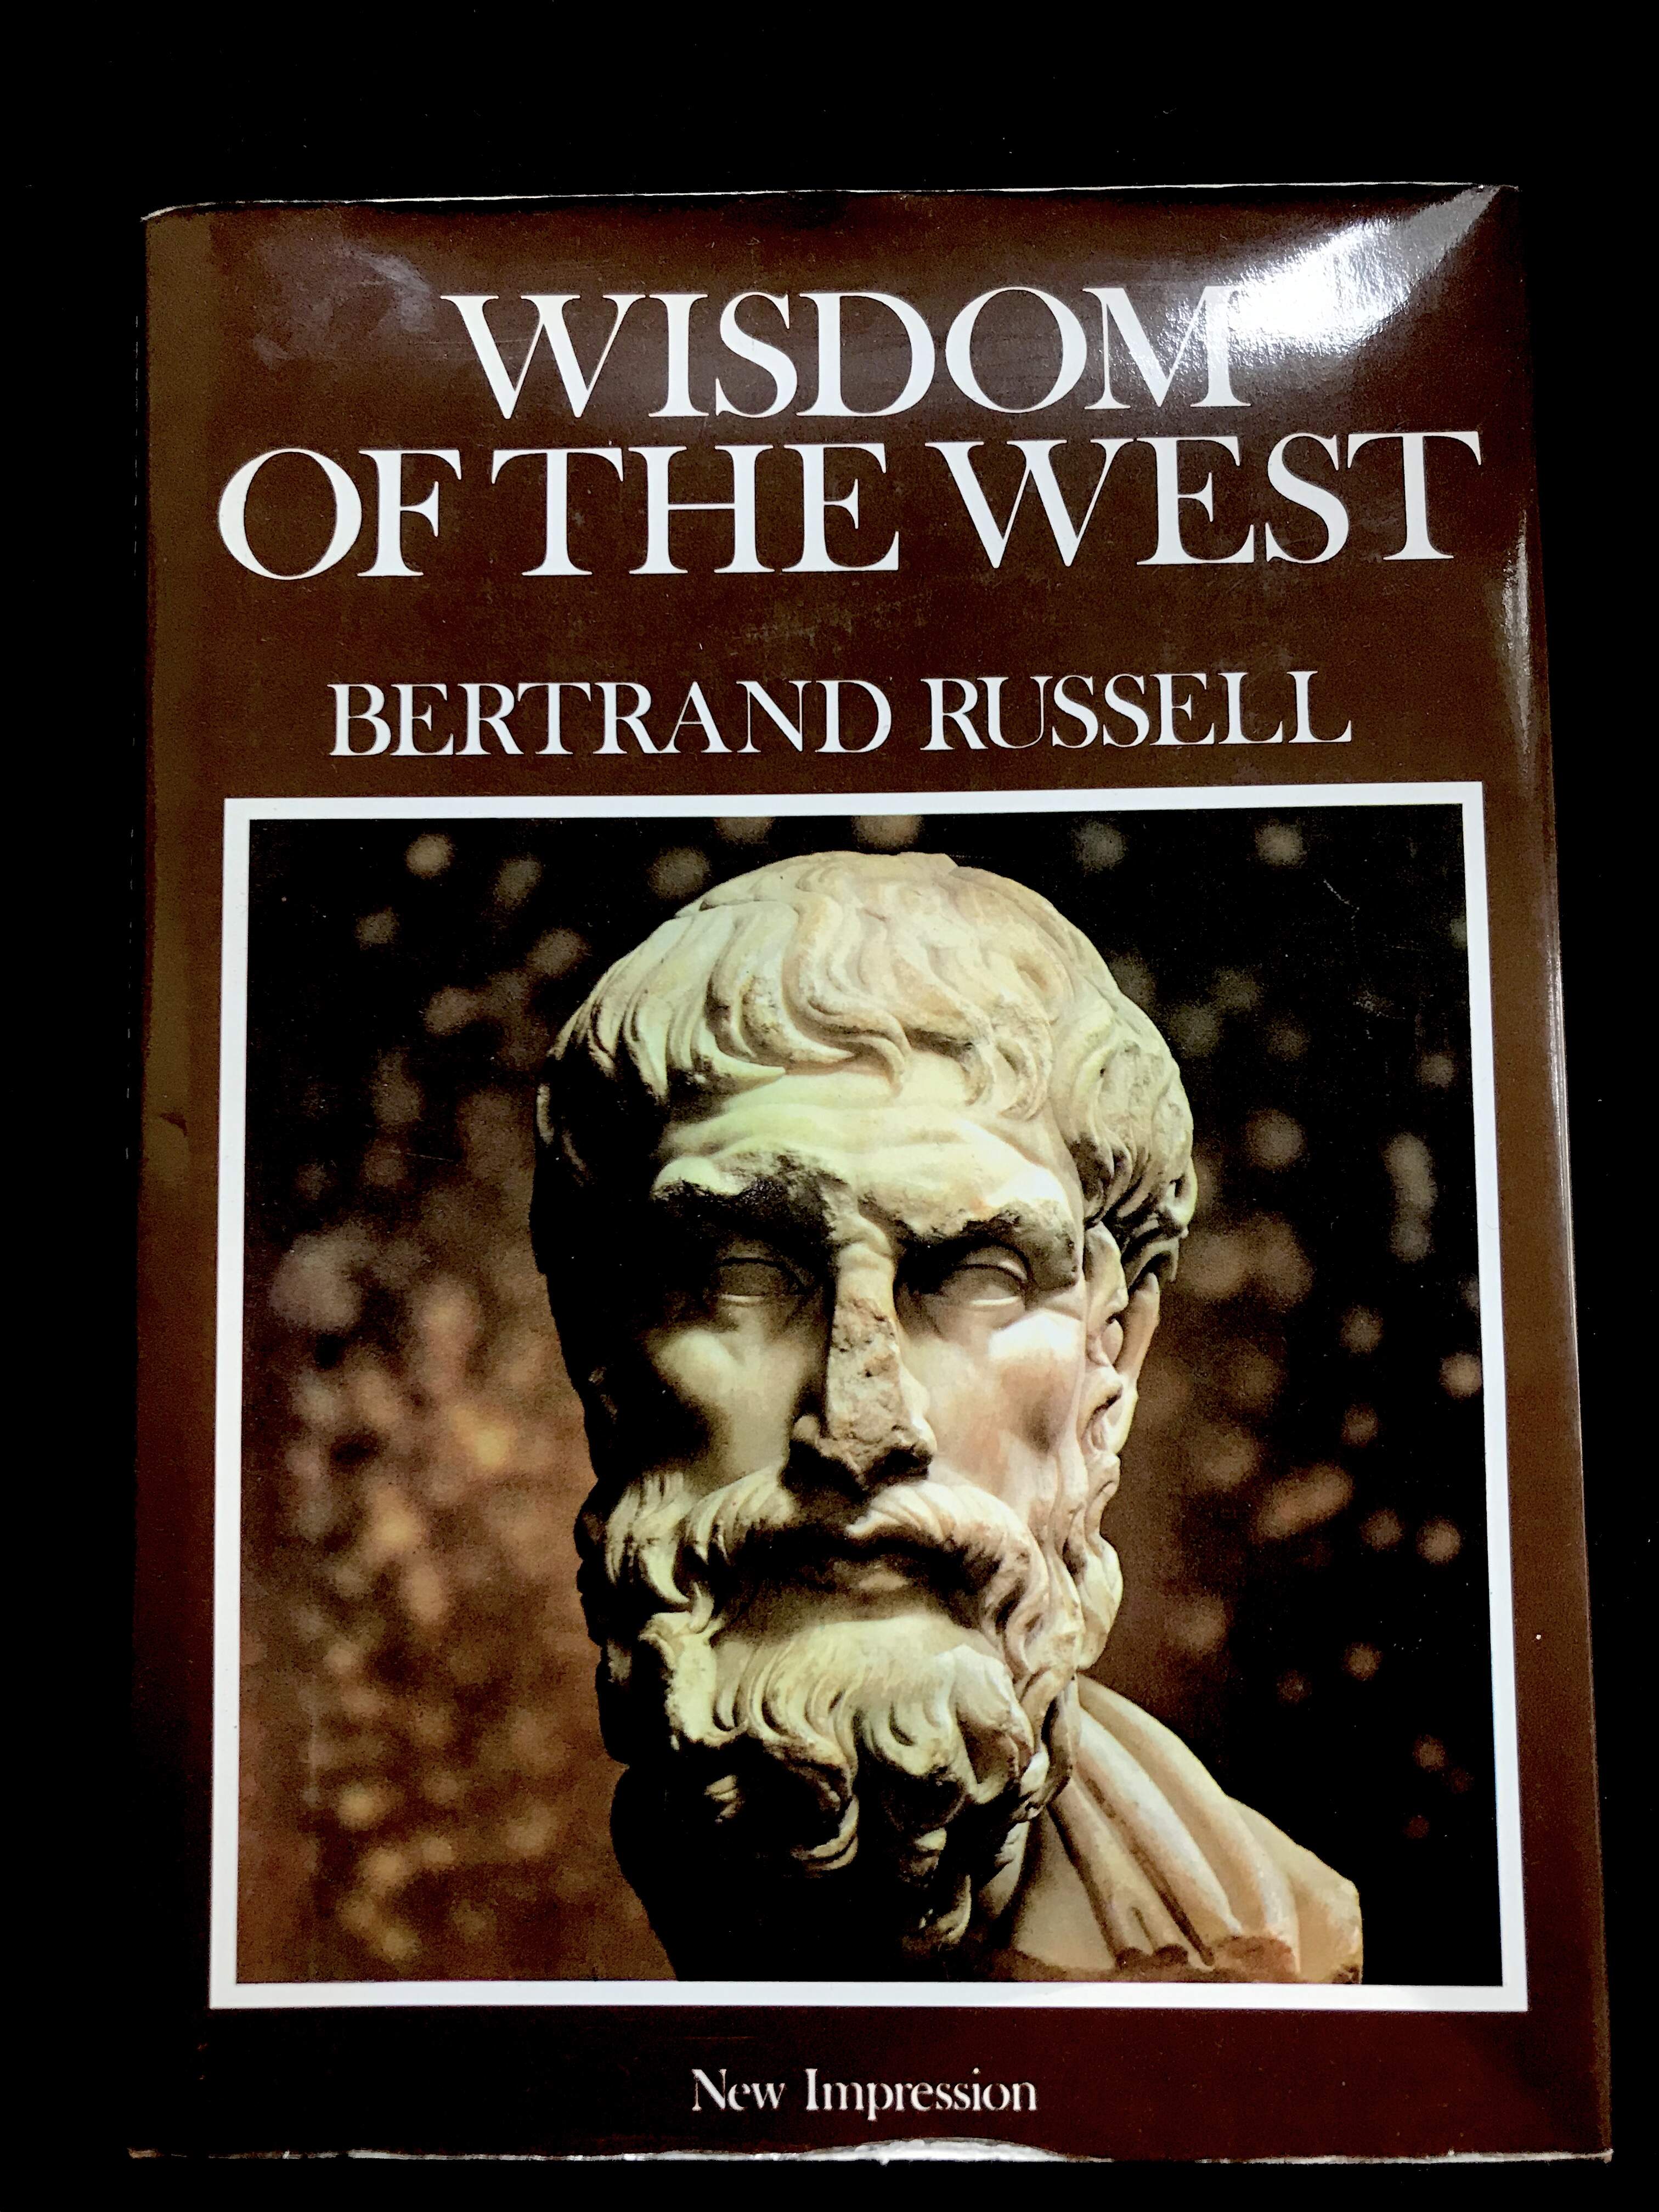 Wisdom of The West by Bertrand Russell